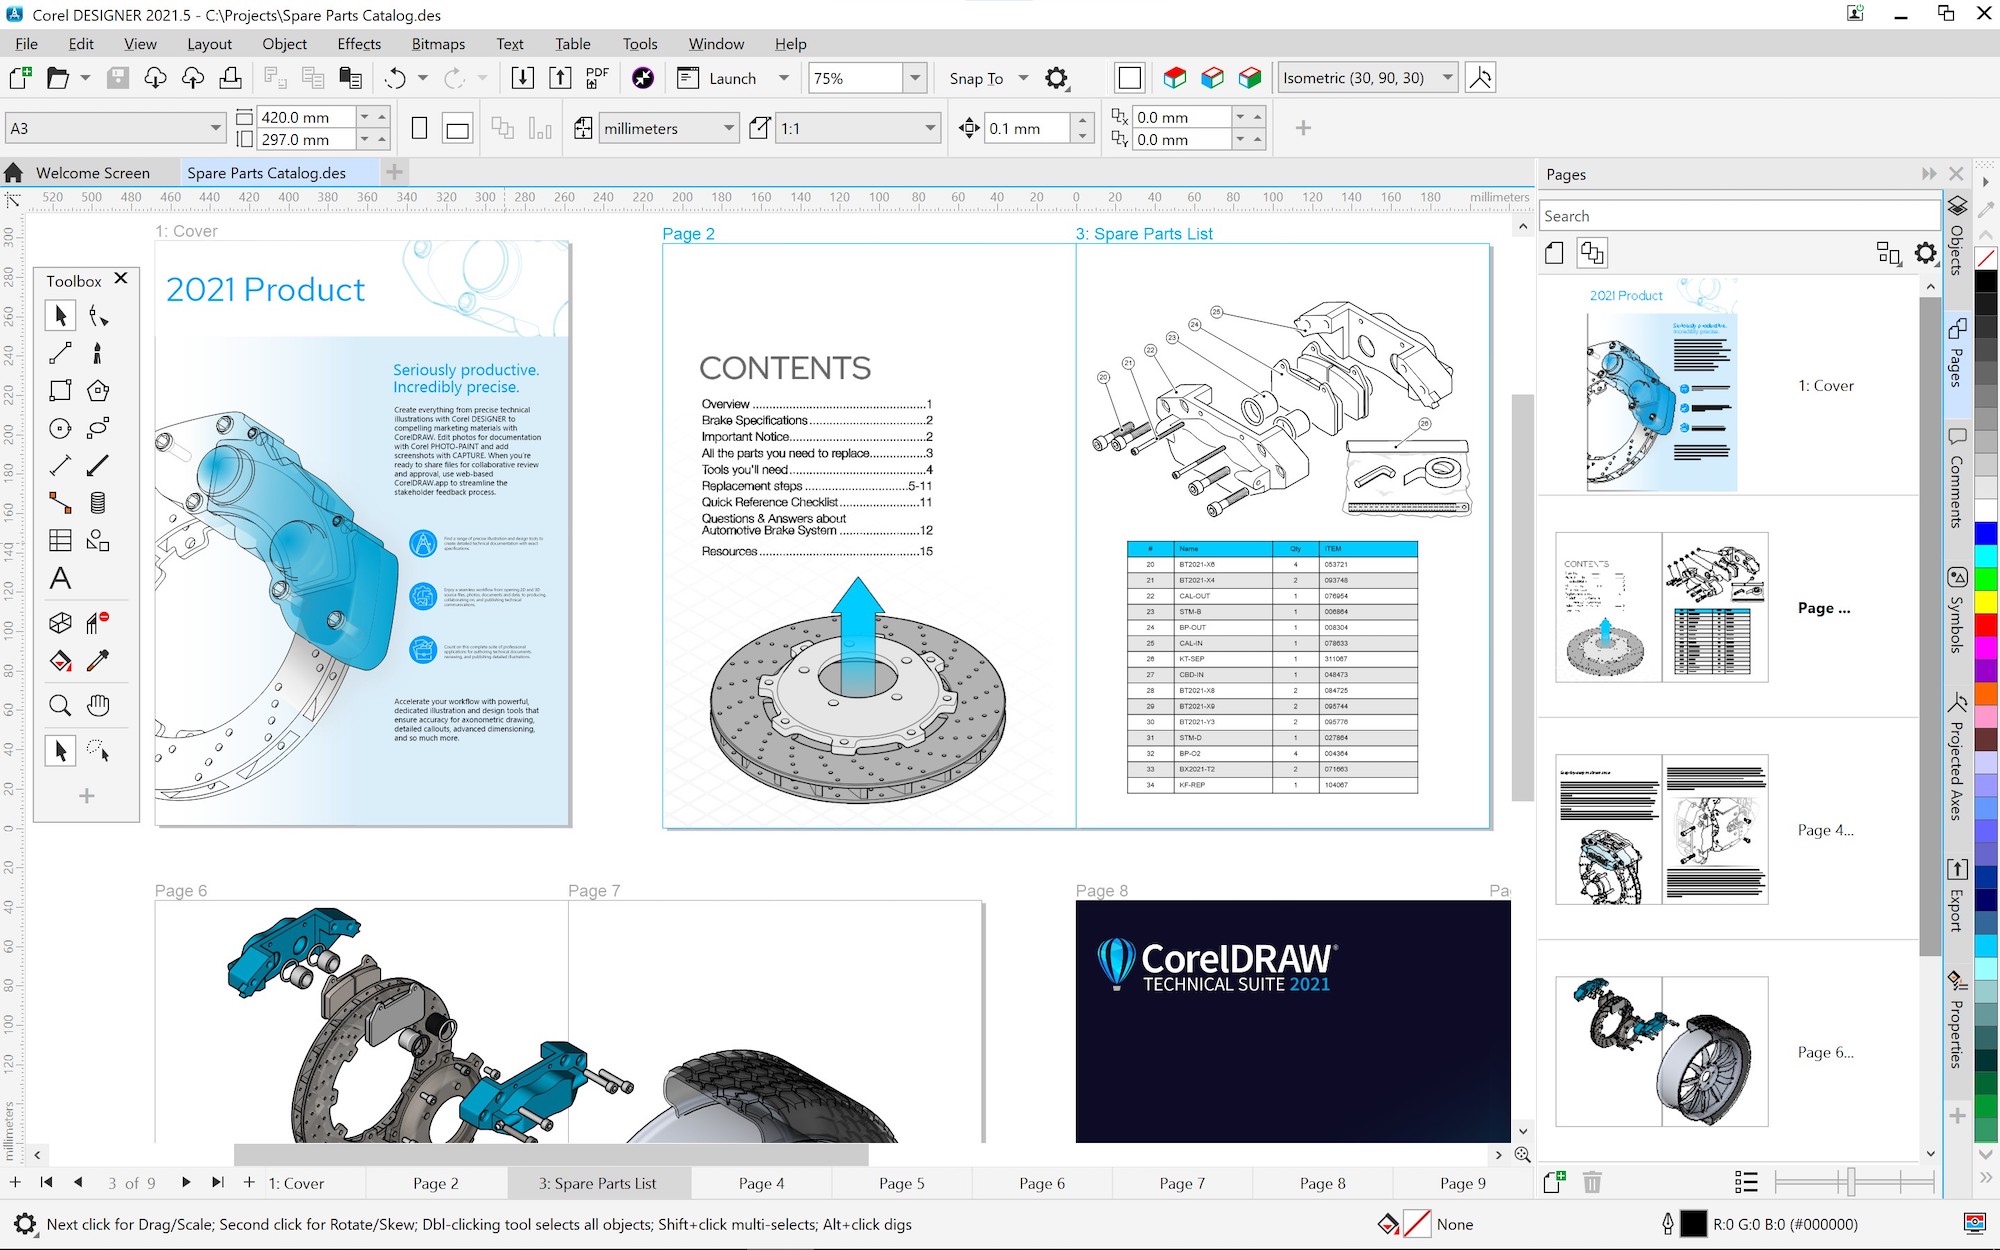 CorelDRAW Technical Suite 2021—Powerful Technical Illustration Connected to  Industrial CAD - Architosh